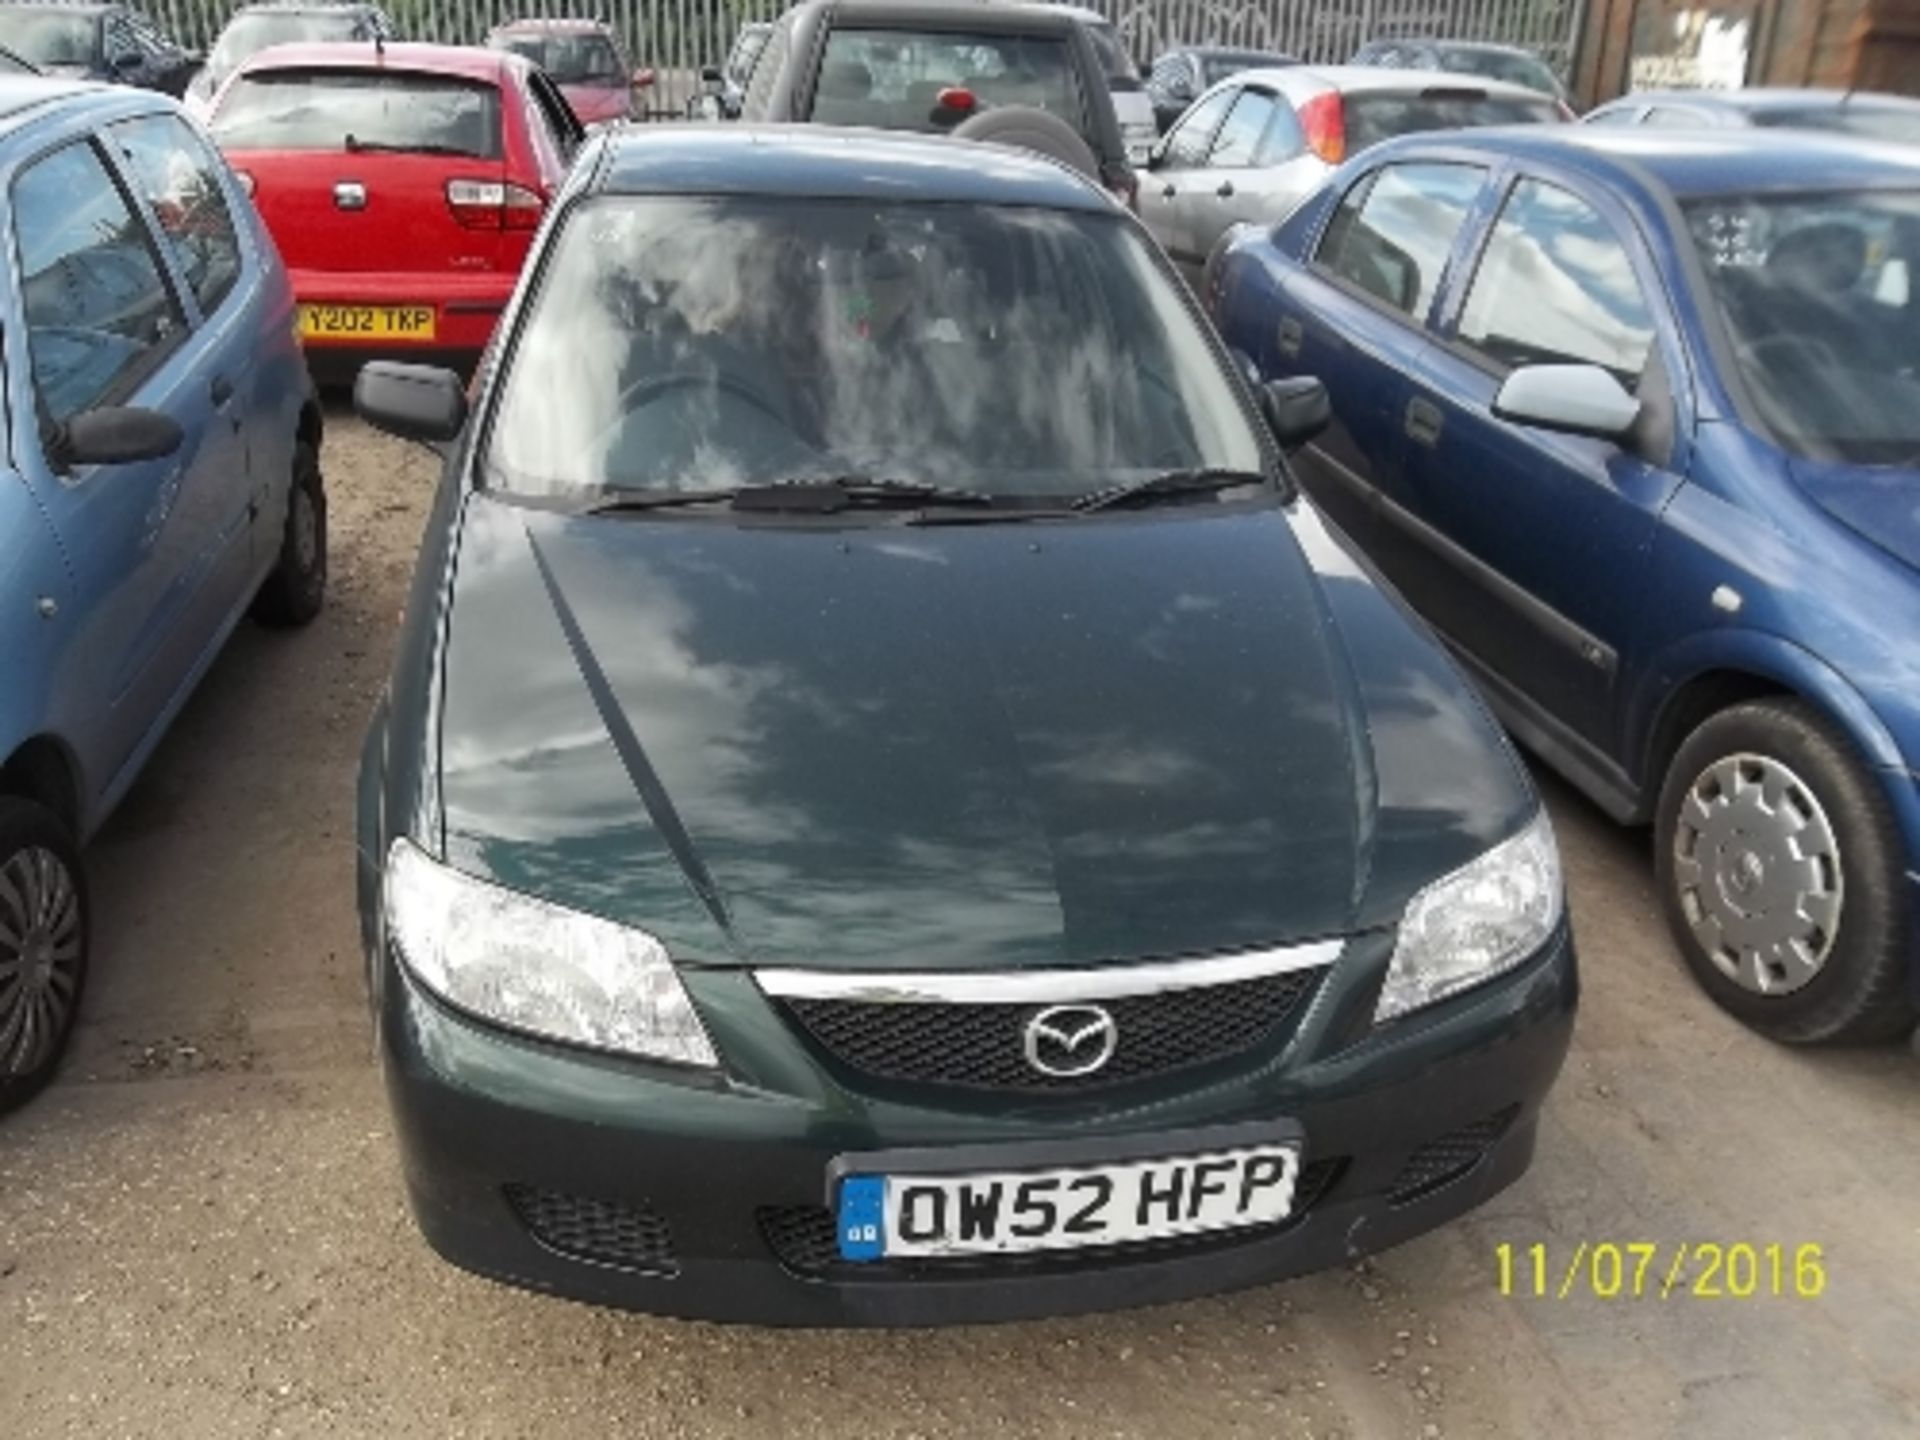 Mazda 323F GXI - OW52 HFPDate of registration: 10.02.20031998cc, diesel, manual, green Odometer